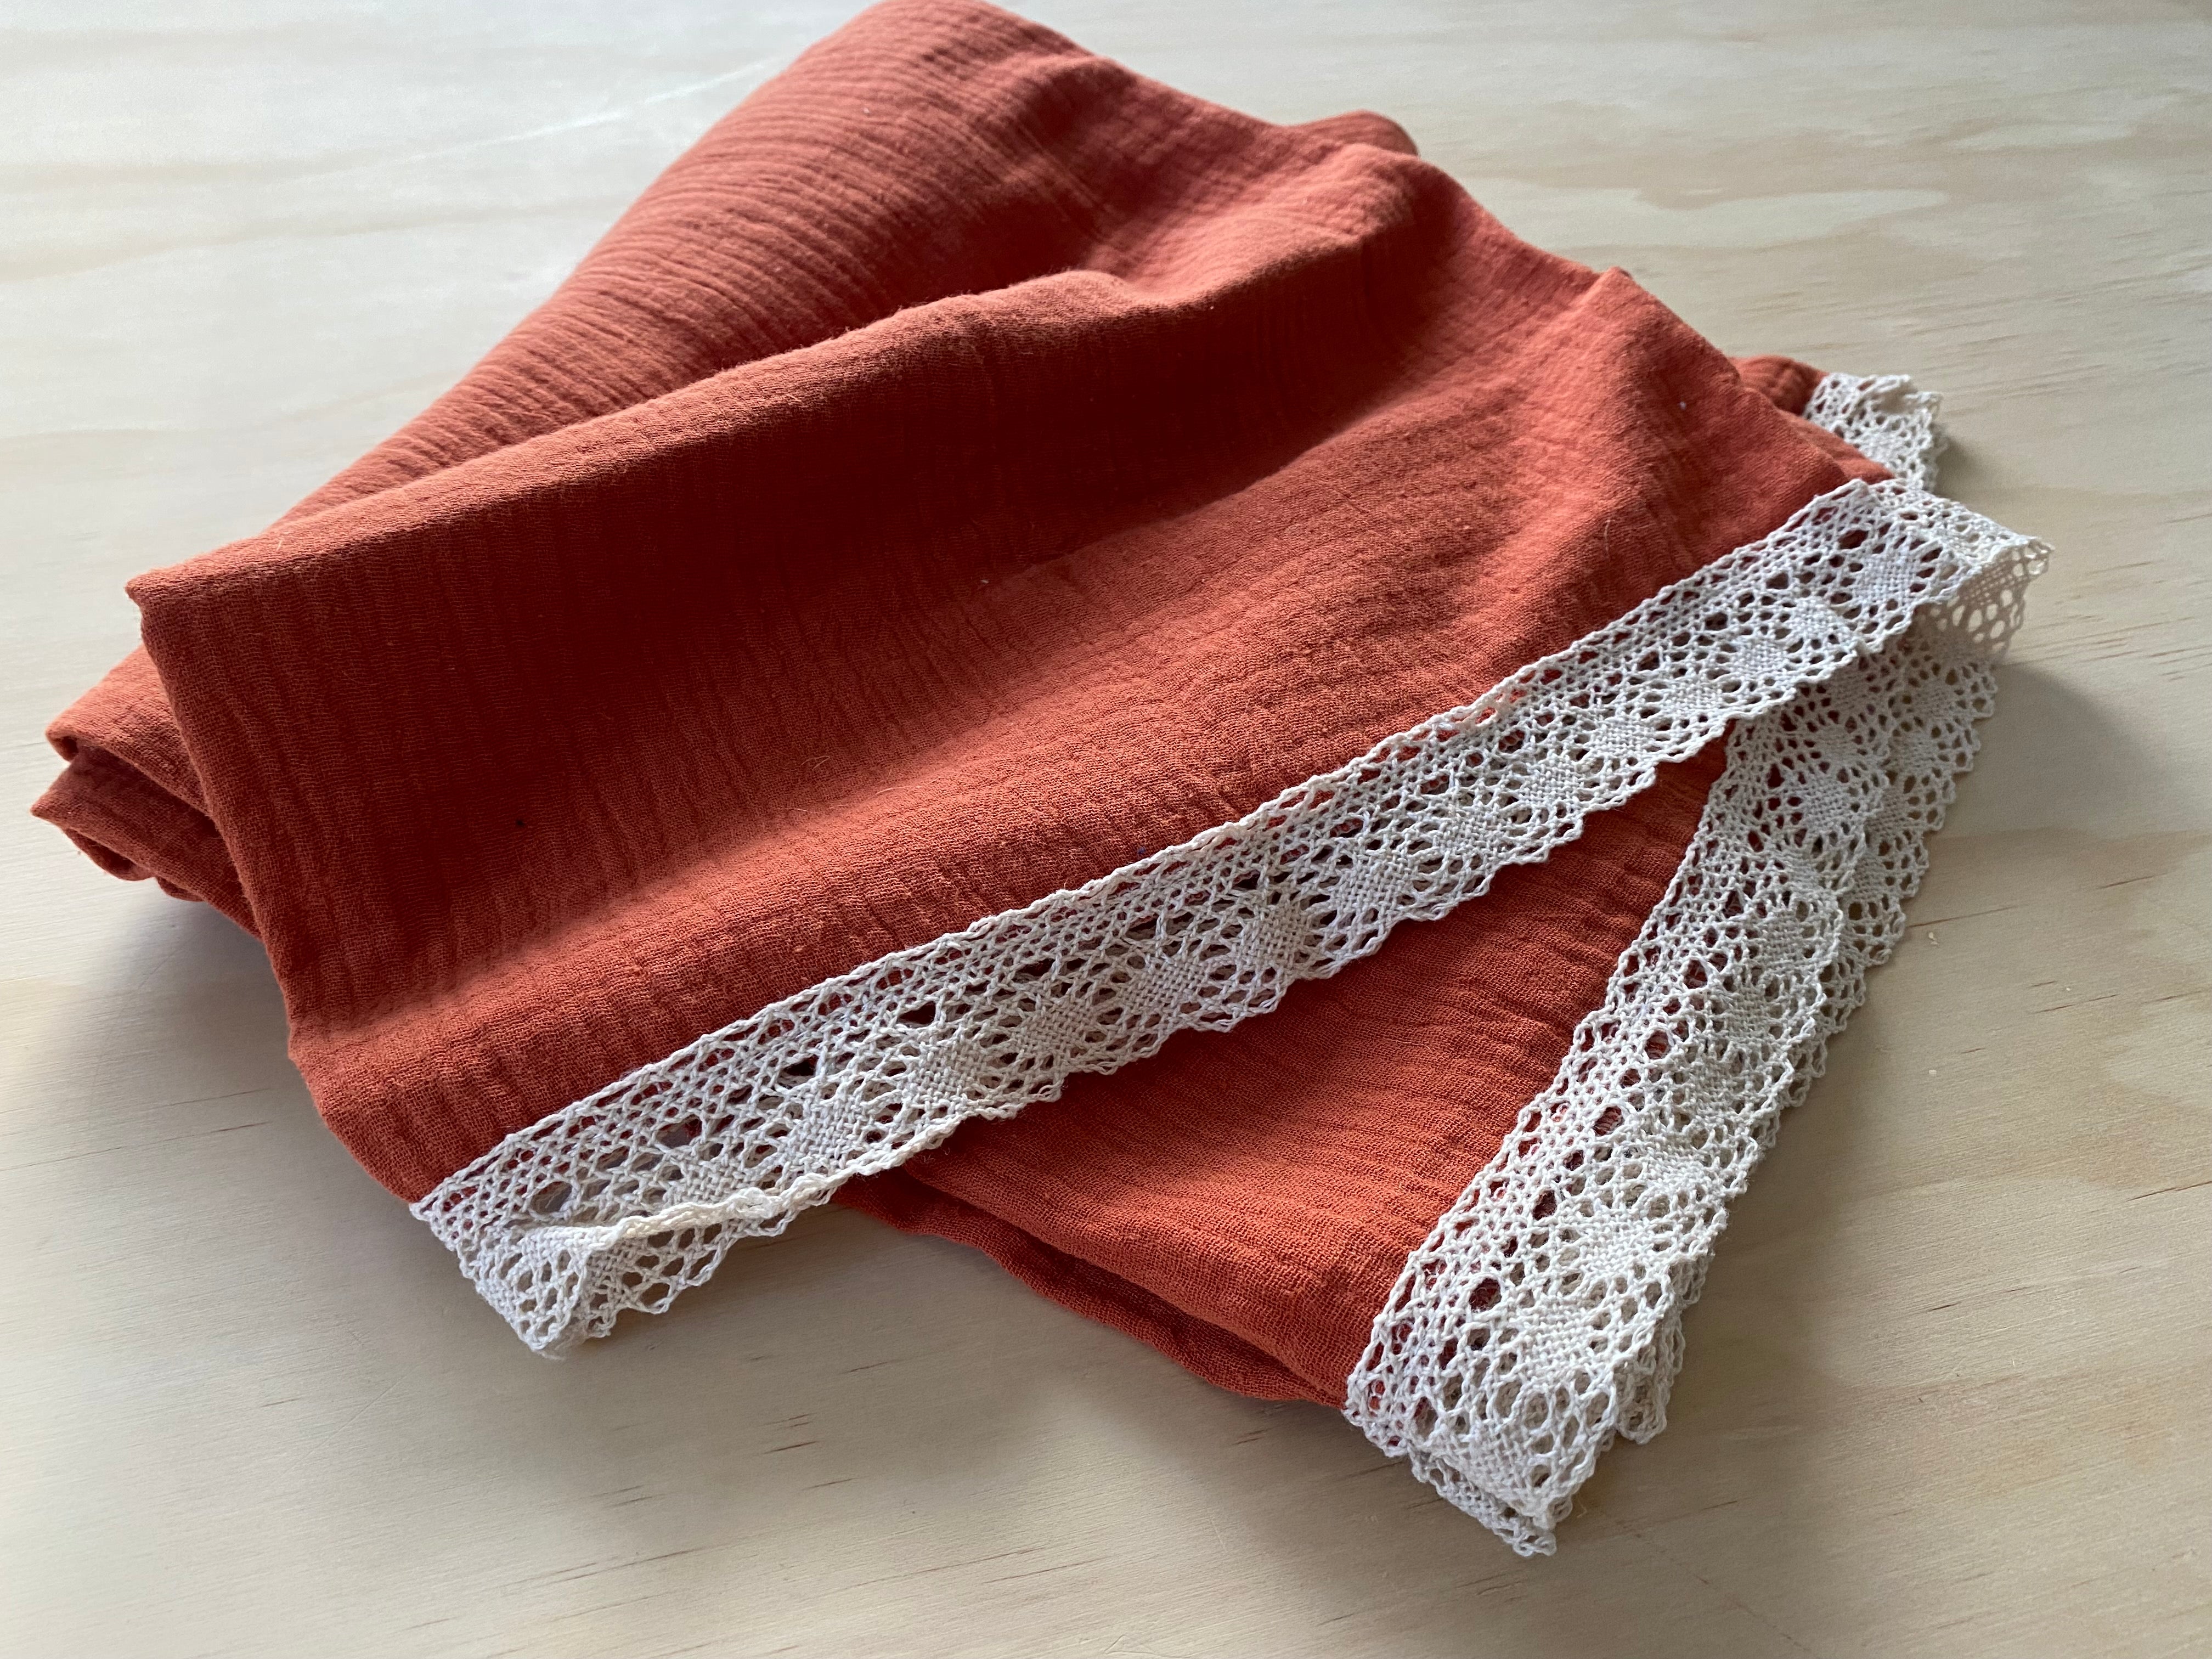 Spice Heirloom Lace Blanket